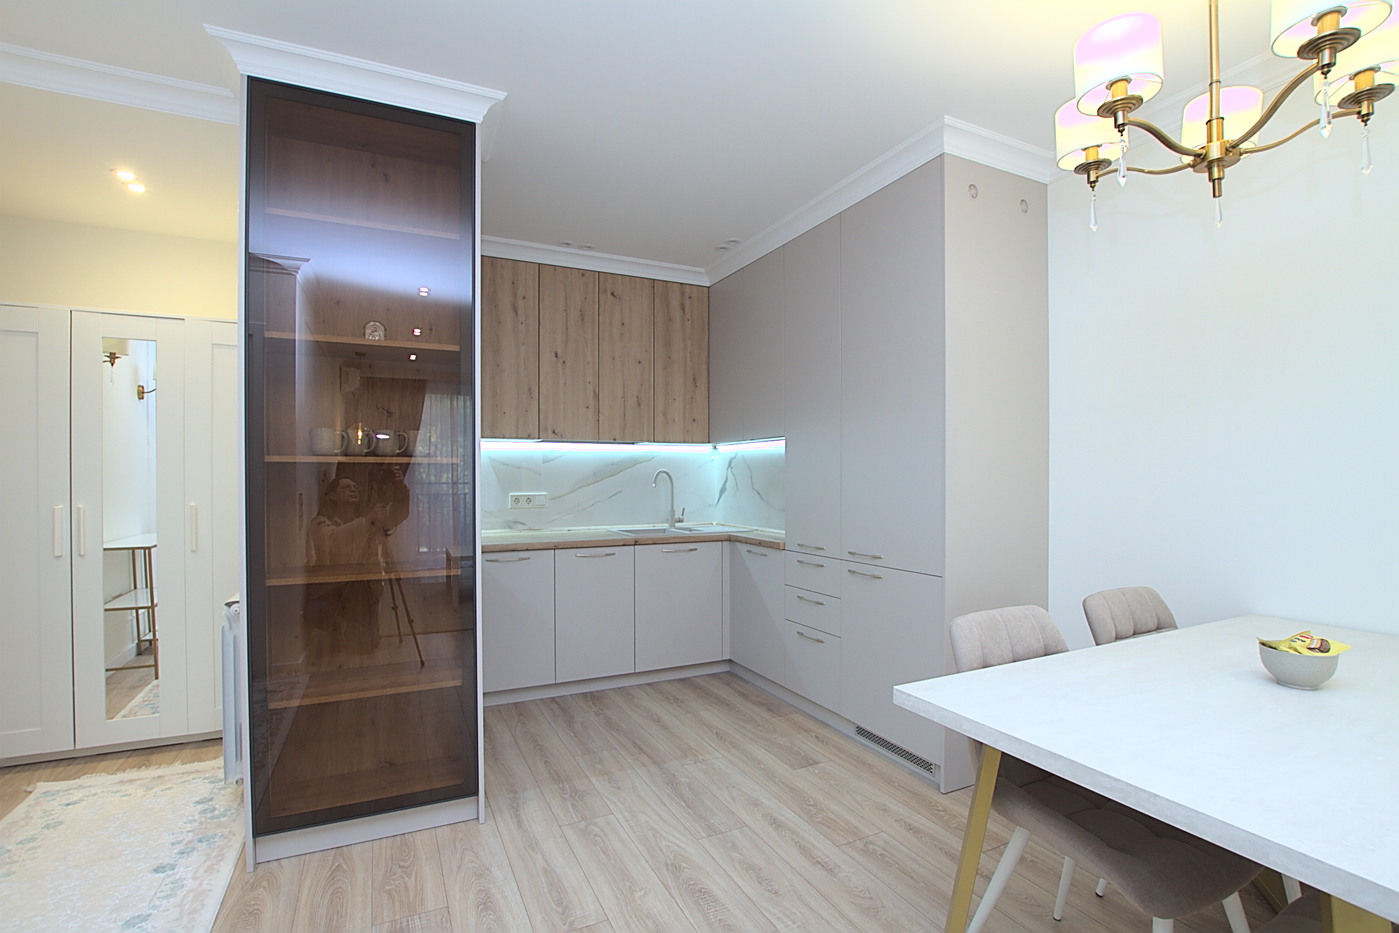 New residence in Chisinau city center: 2 rooms, 1 bedroom, 55 m²